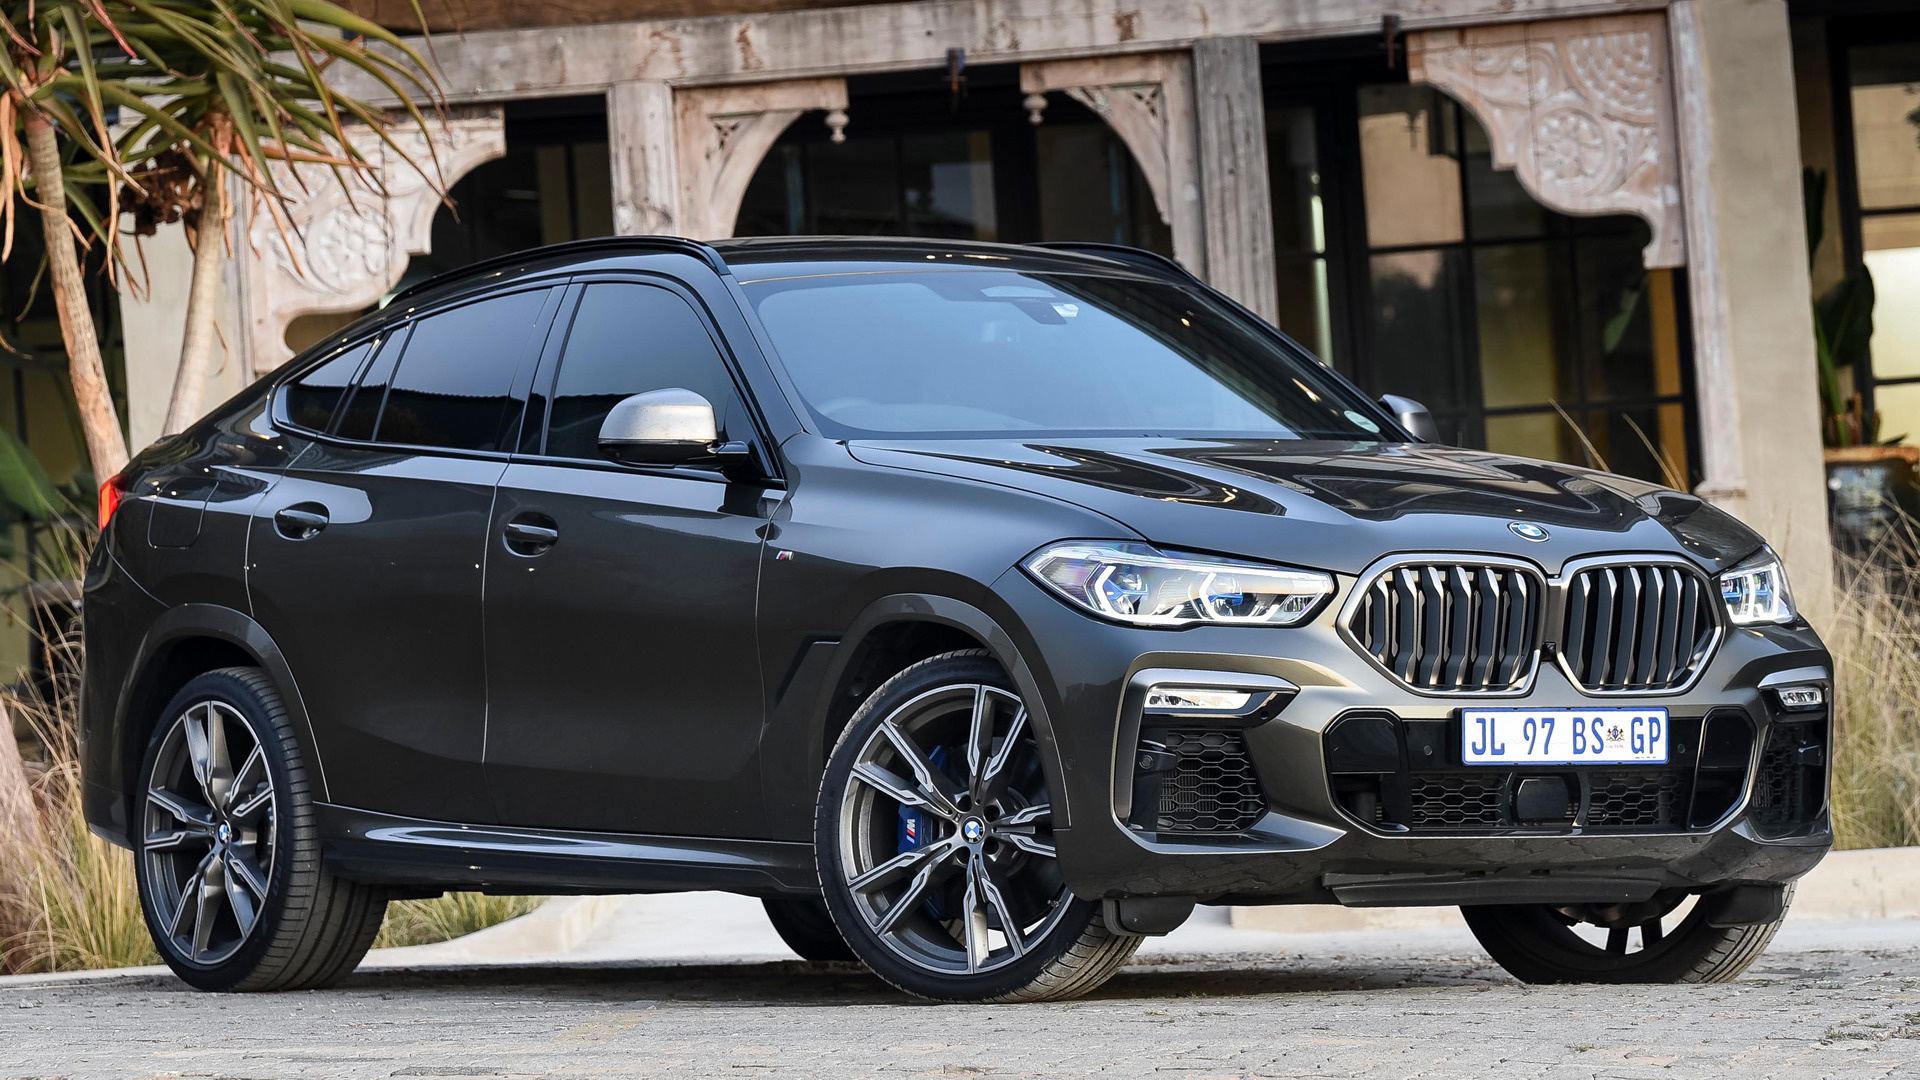 2020 BMW X6 M50d (ZA) - Wallpapers and HD Images | Car Pixel